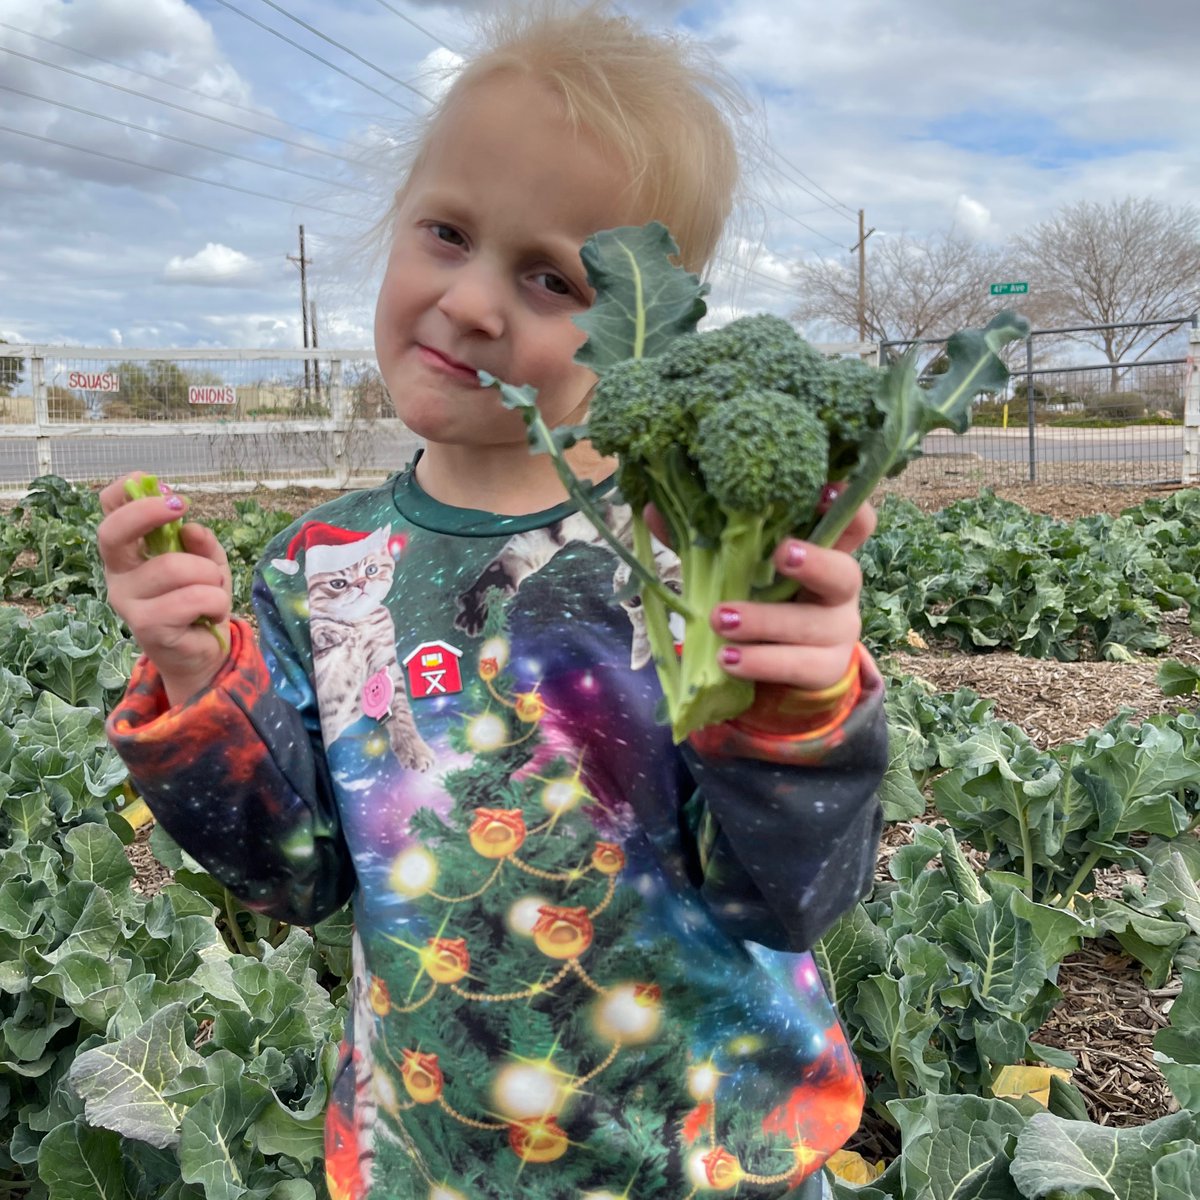 Harvesting tons of beautiful organic broccoli from the front field today! 
#kidsareourfuture #broccoli #organic